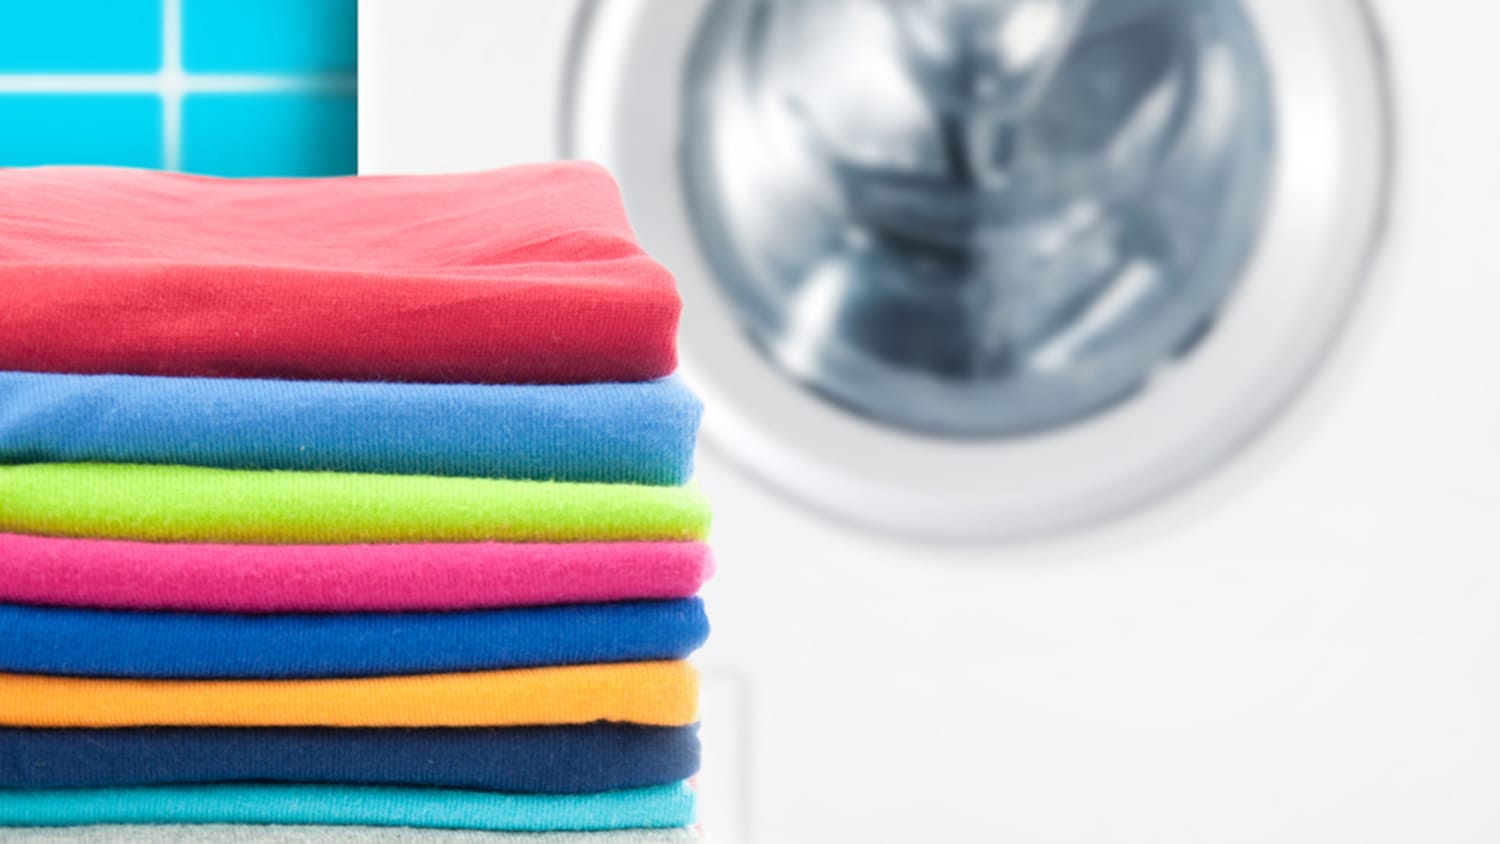 https://media-cldnry.s-nbcnews.com/image/upload/newscms/2015_21/561946/new-clothes-wash-before-wear-today-stock-tease-150519.jpg